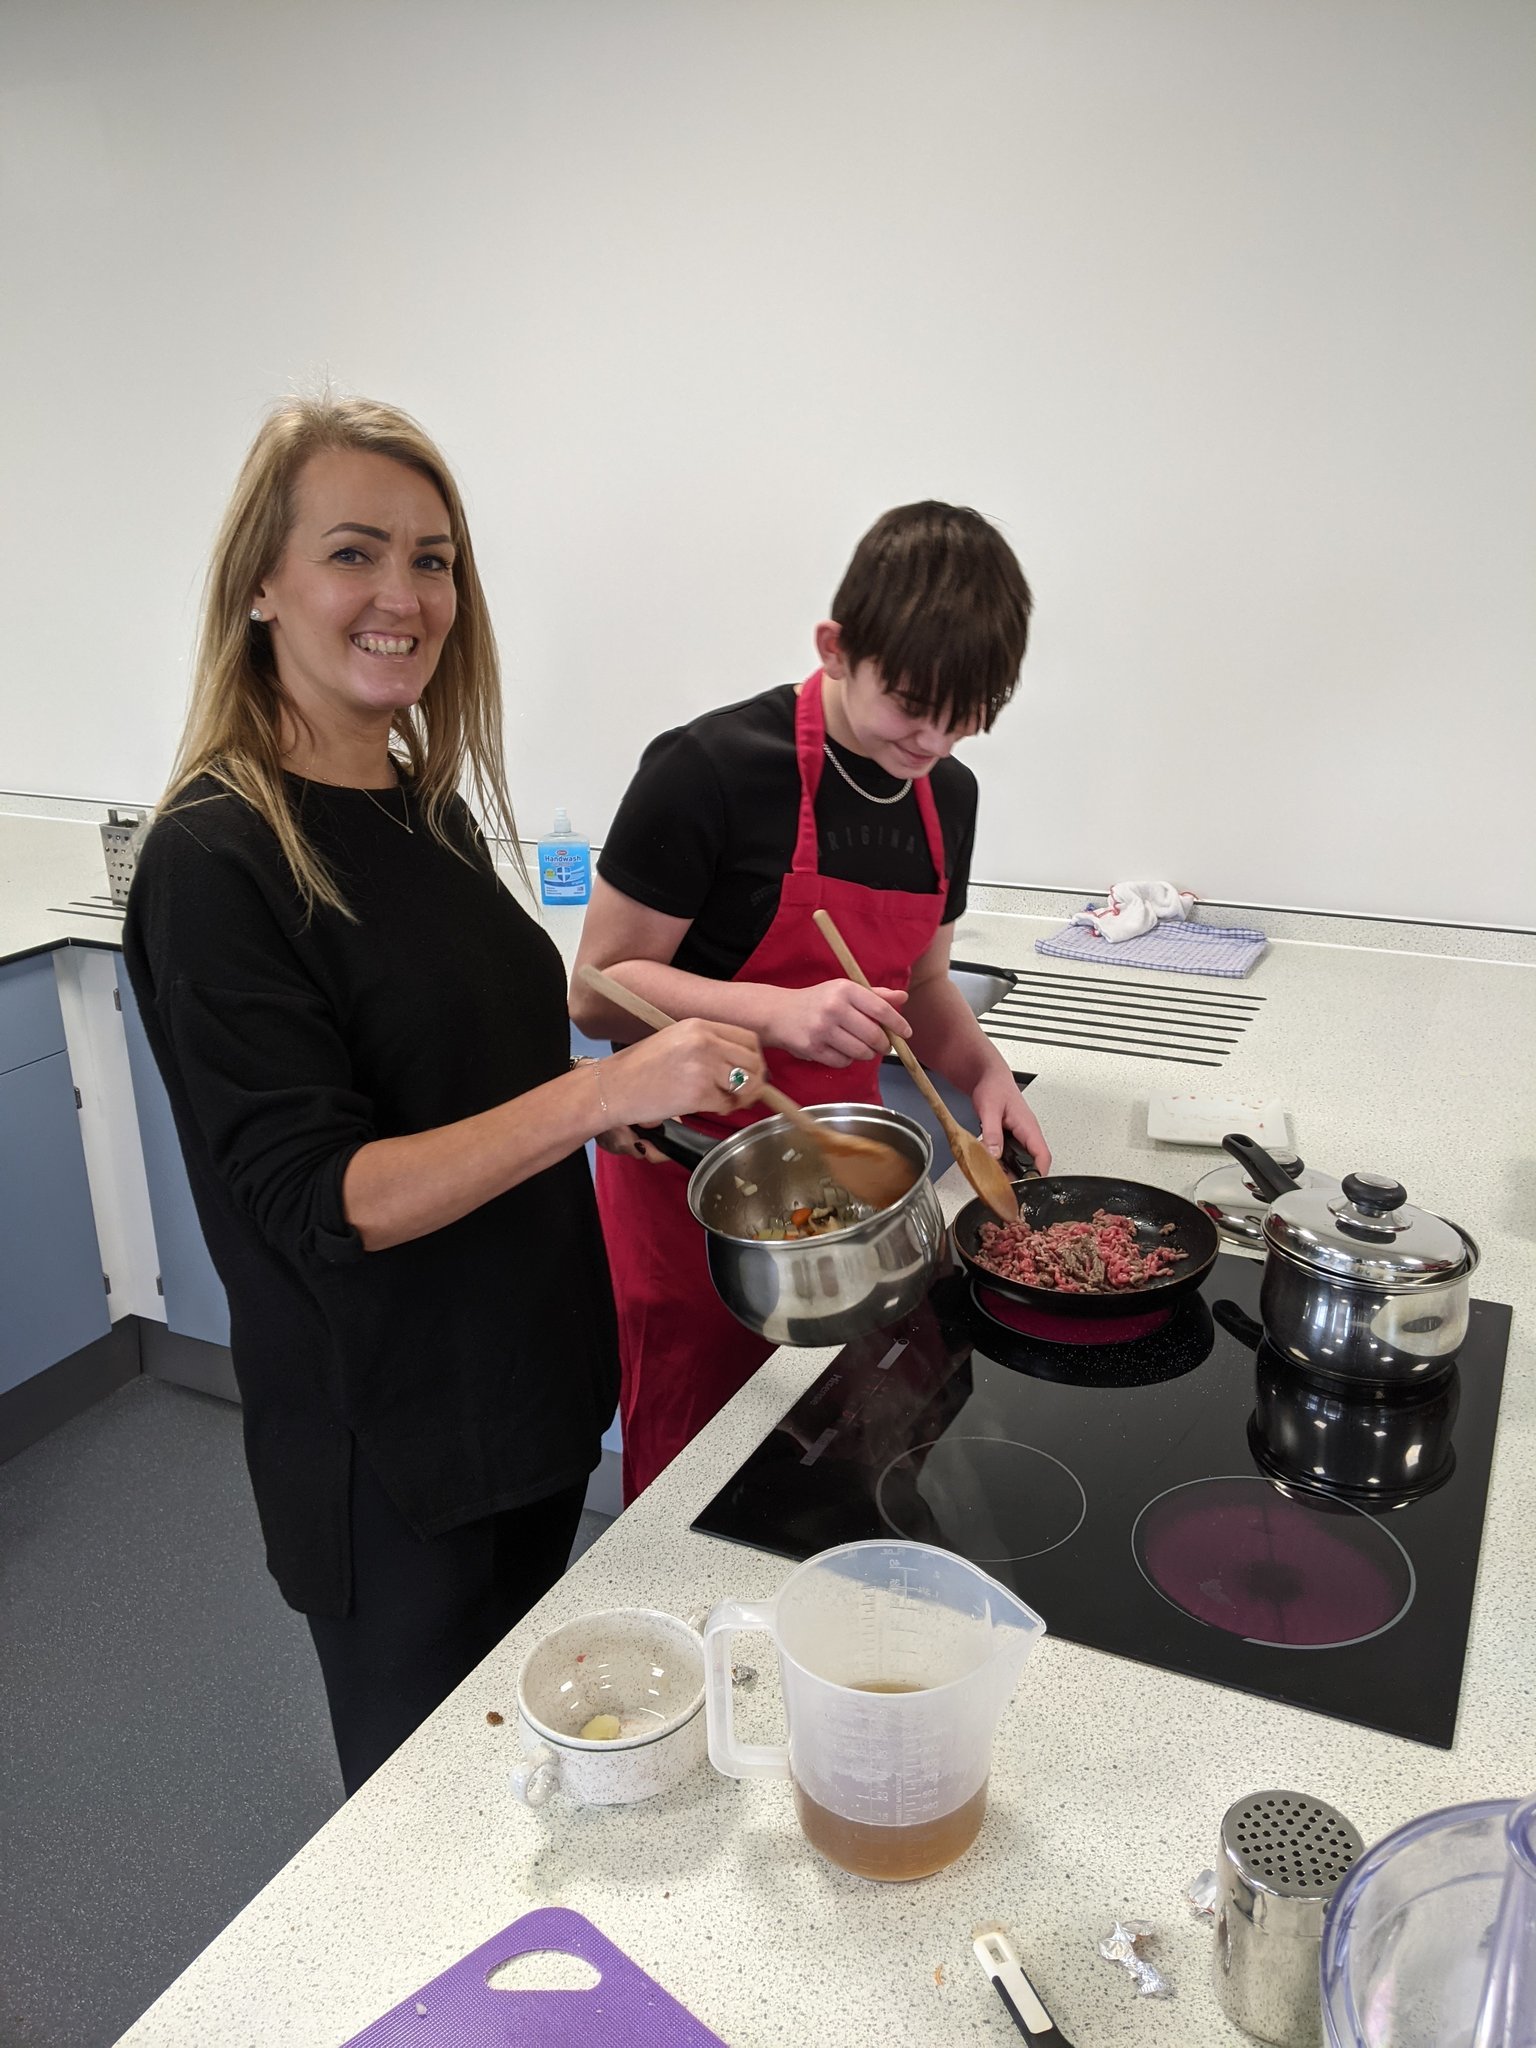 Students learn how to make pies in cookery classes